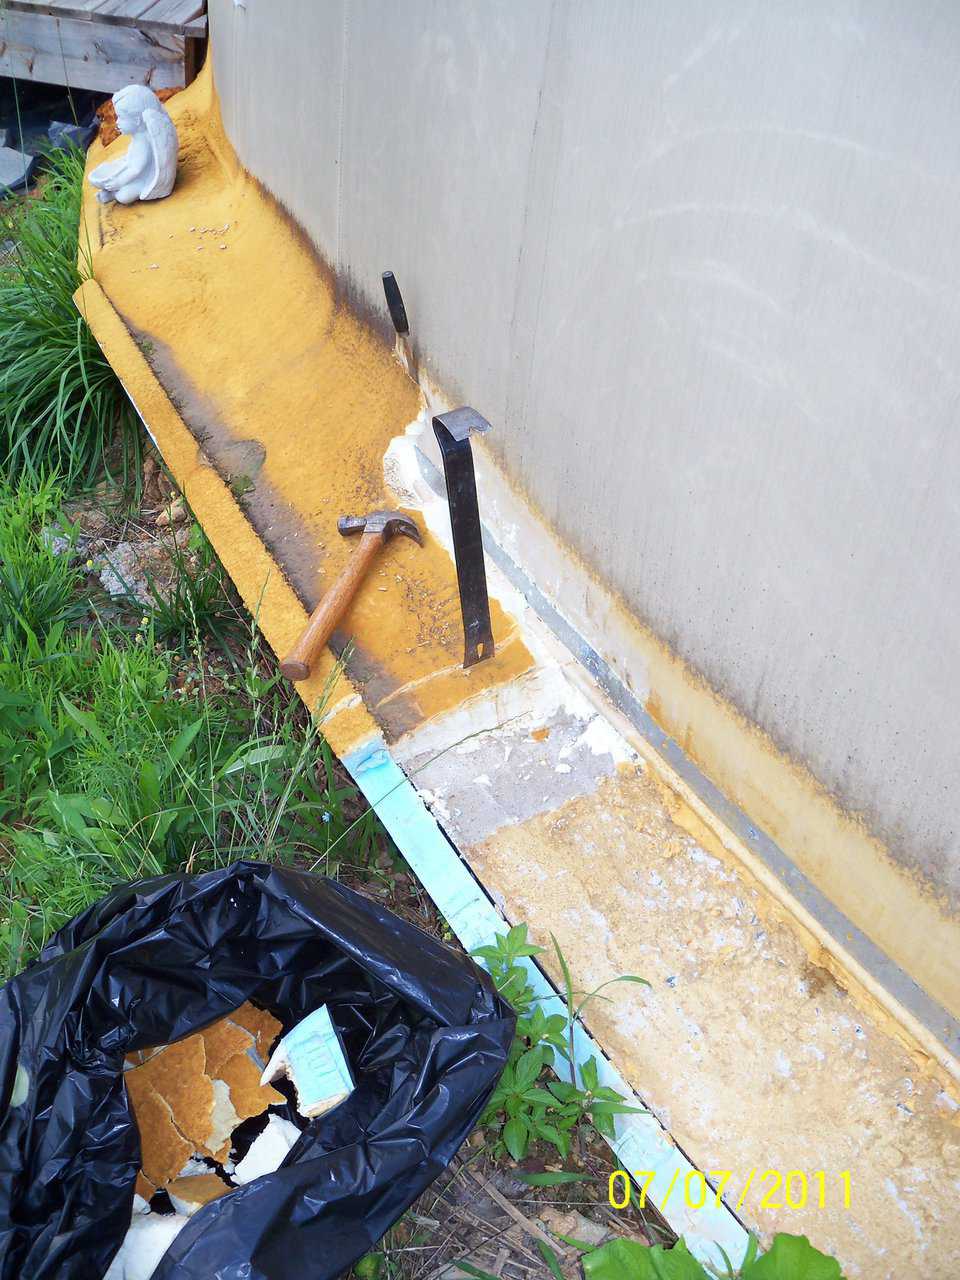 Off with the band! — two years later the foam band was chiseled off the foundation so exterior finish work could begin. In the photo’s lower right corner, note the tanned UV discoloration on the foam’s surface and the small puddle along the metal strapping.